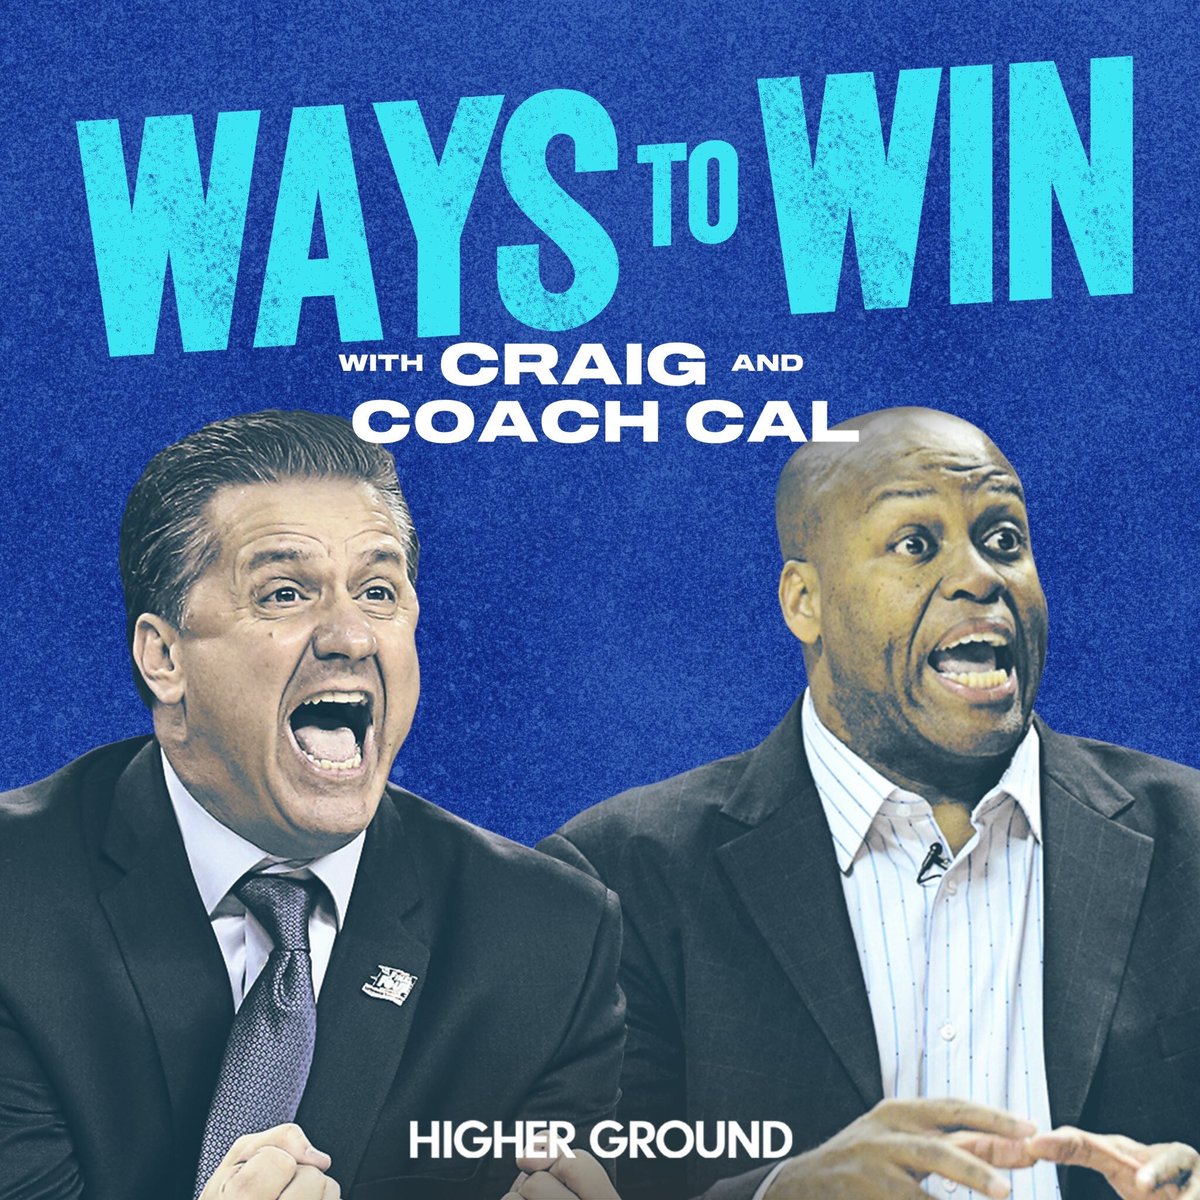 My big brother @CraigMalRob and @UKCoachCalipari just launched their podcast, Ways To Win, and I hope you'll check it out! In the first episode, they chat with Barack about his #MarchMadness picks, leadership in sports, and their enduring love for basketball. Listen now